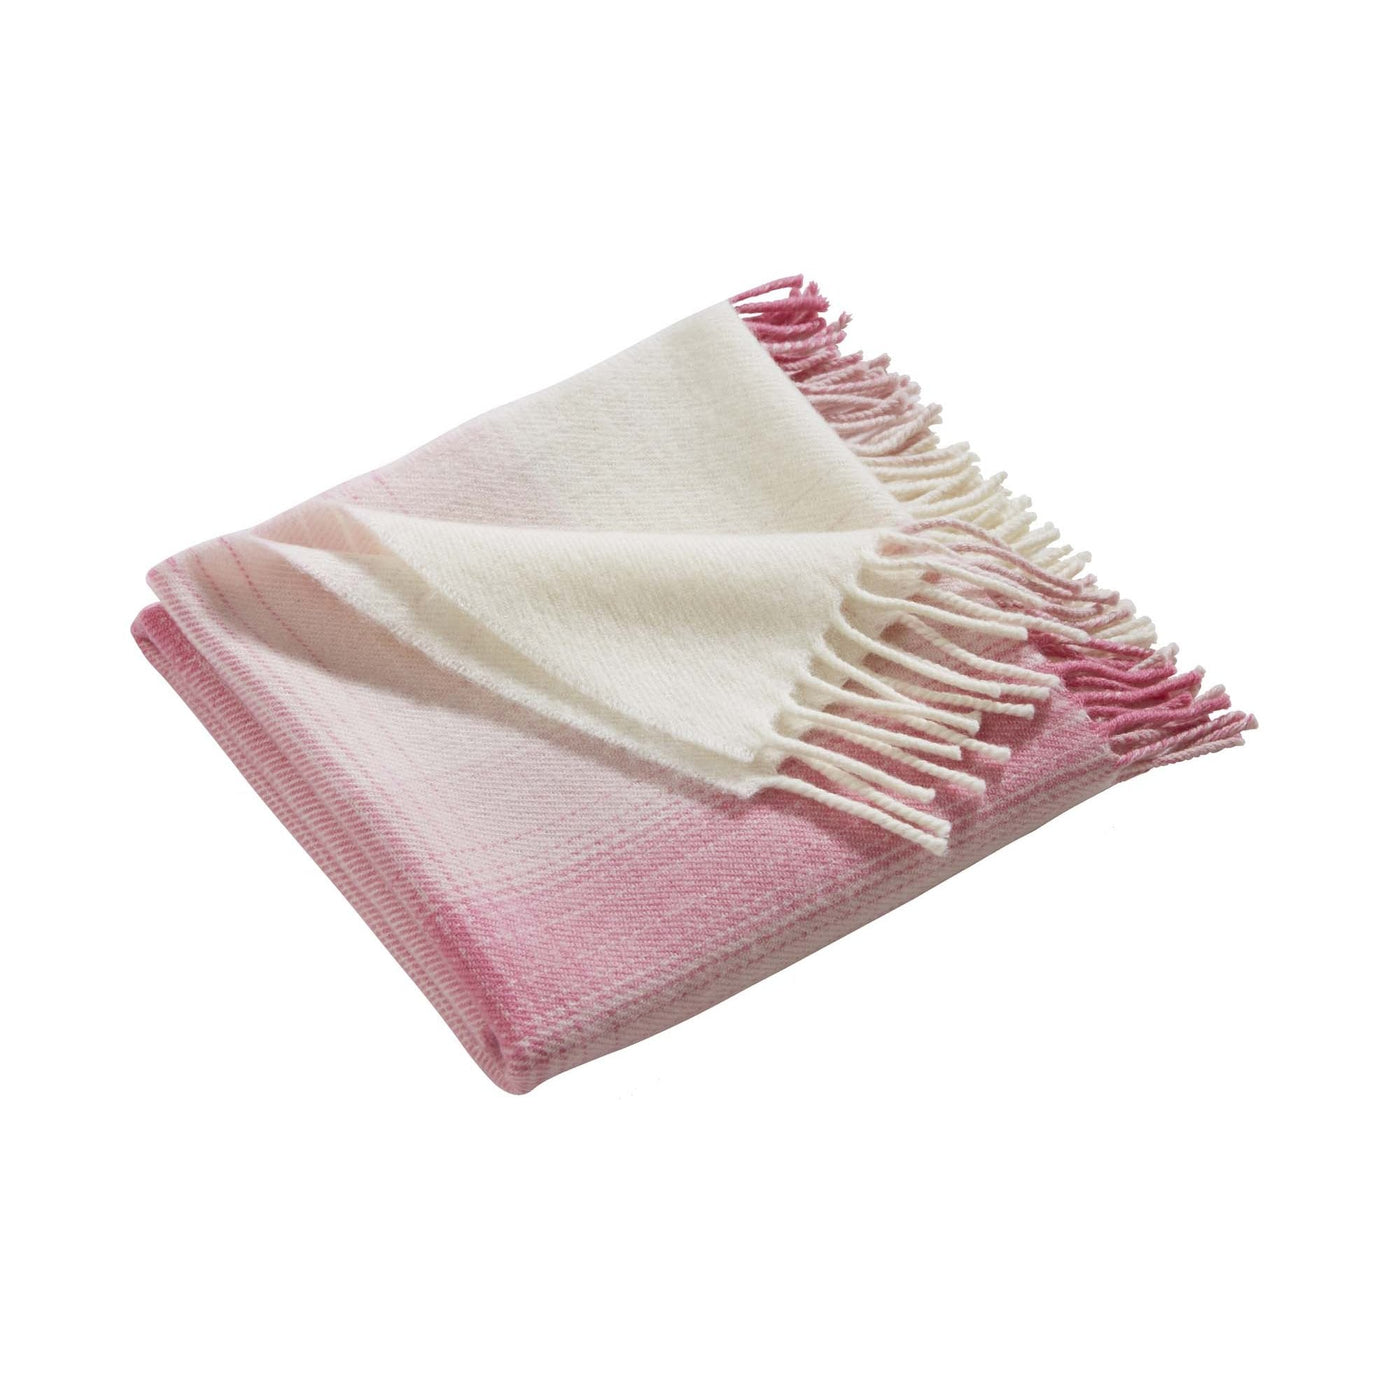 Soho Pure Merino Supersoft Lambswool Baby Shawl Collection